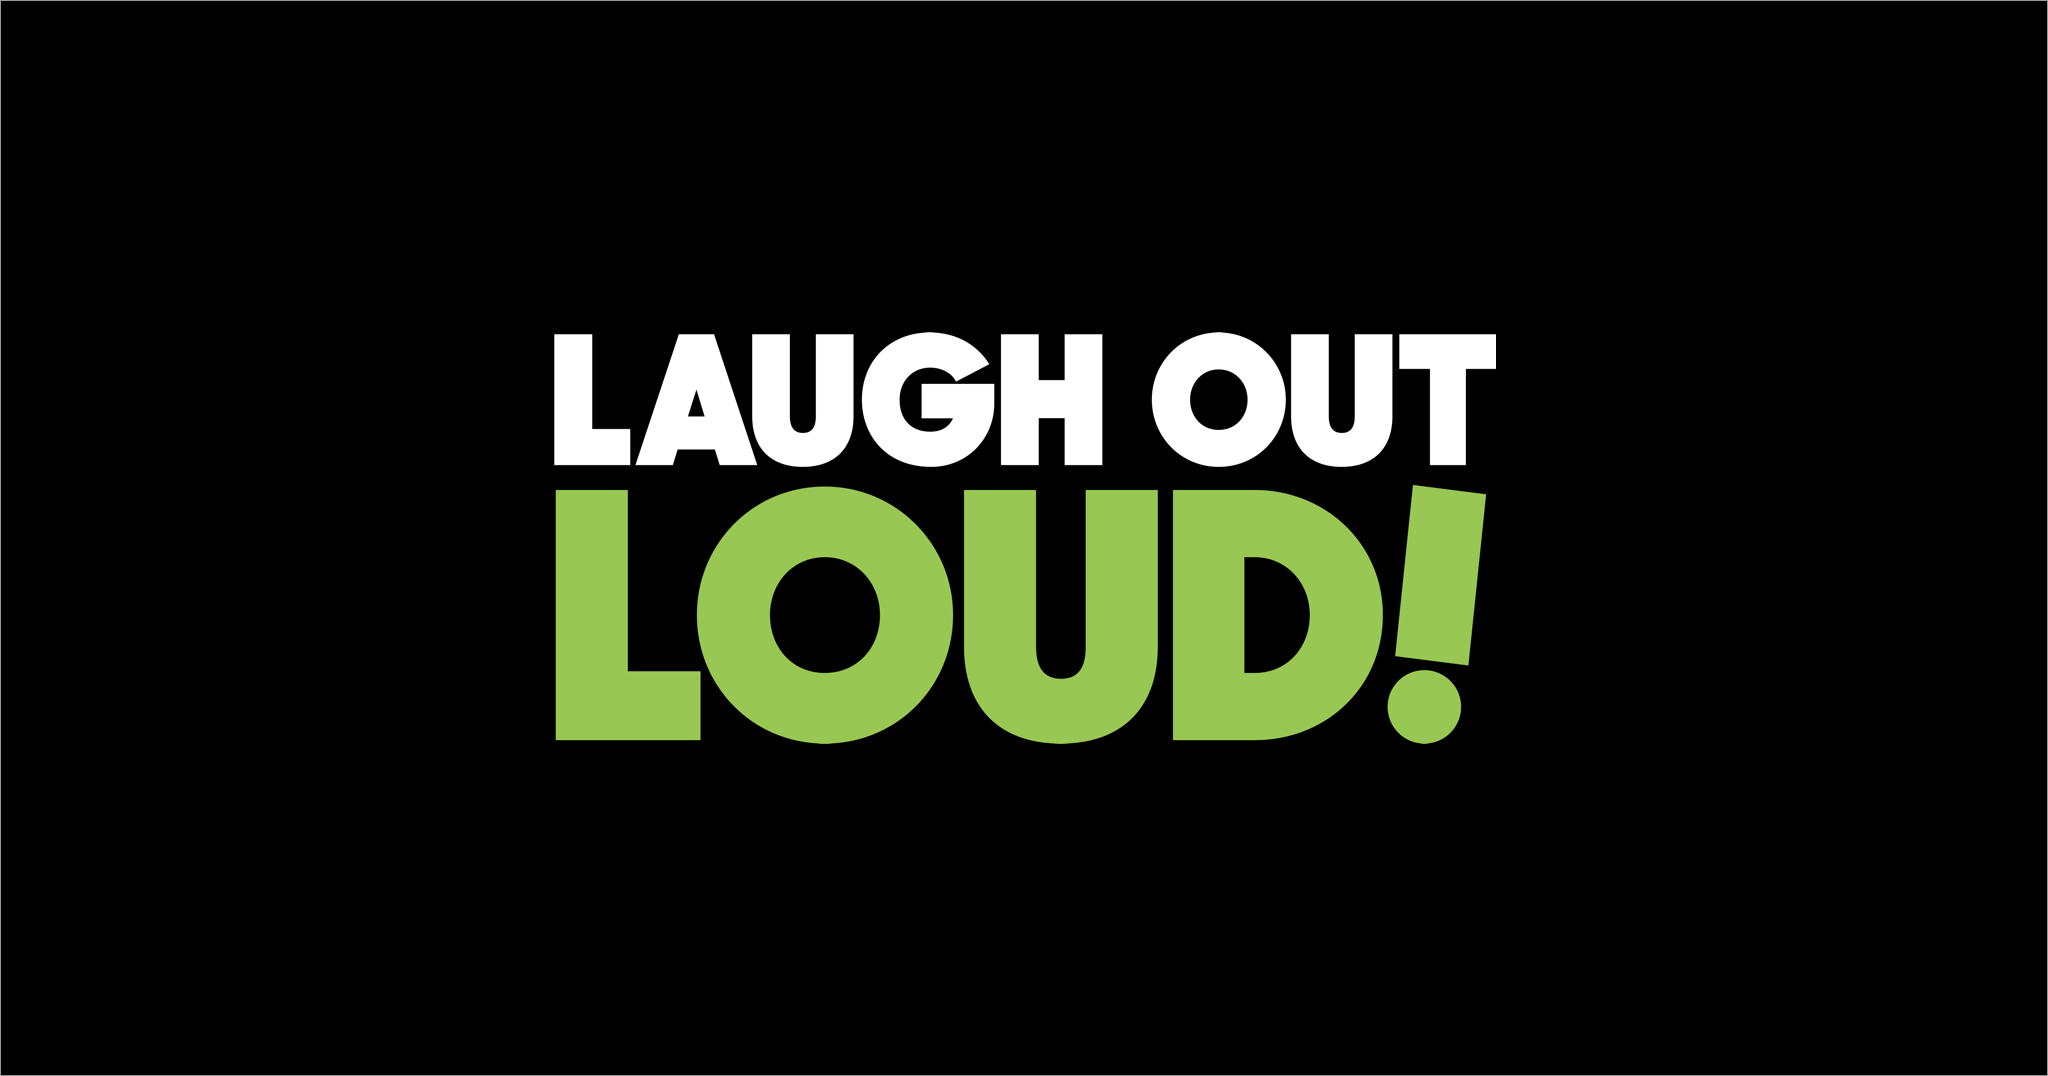 LOL - Laugh Out Loud by